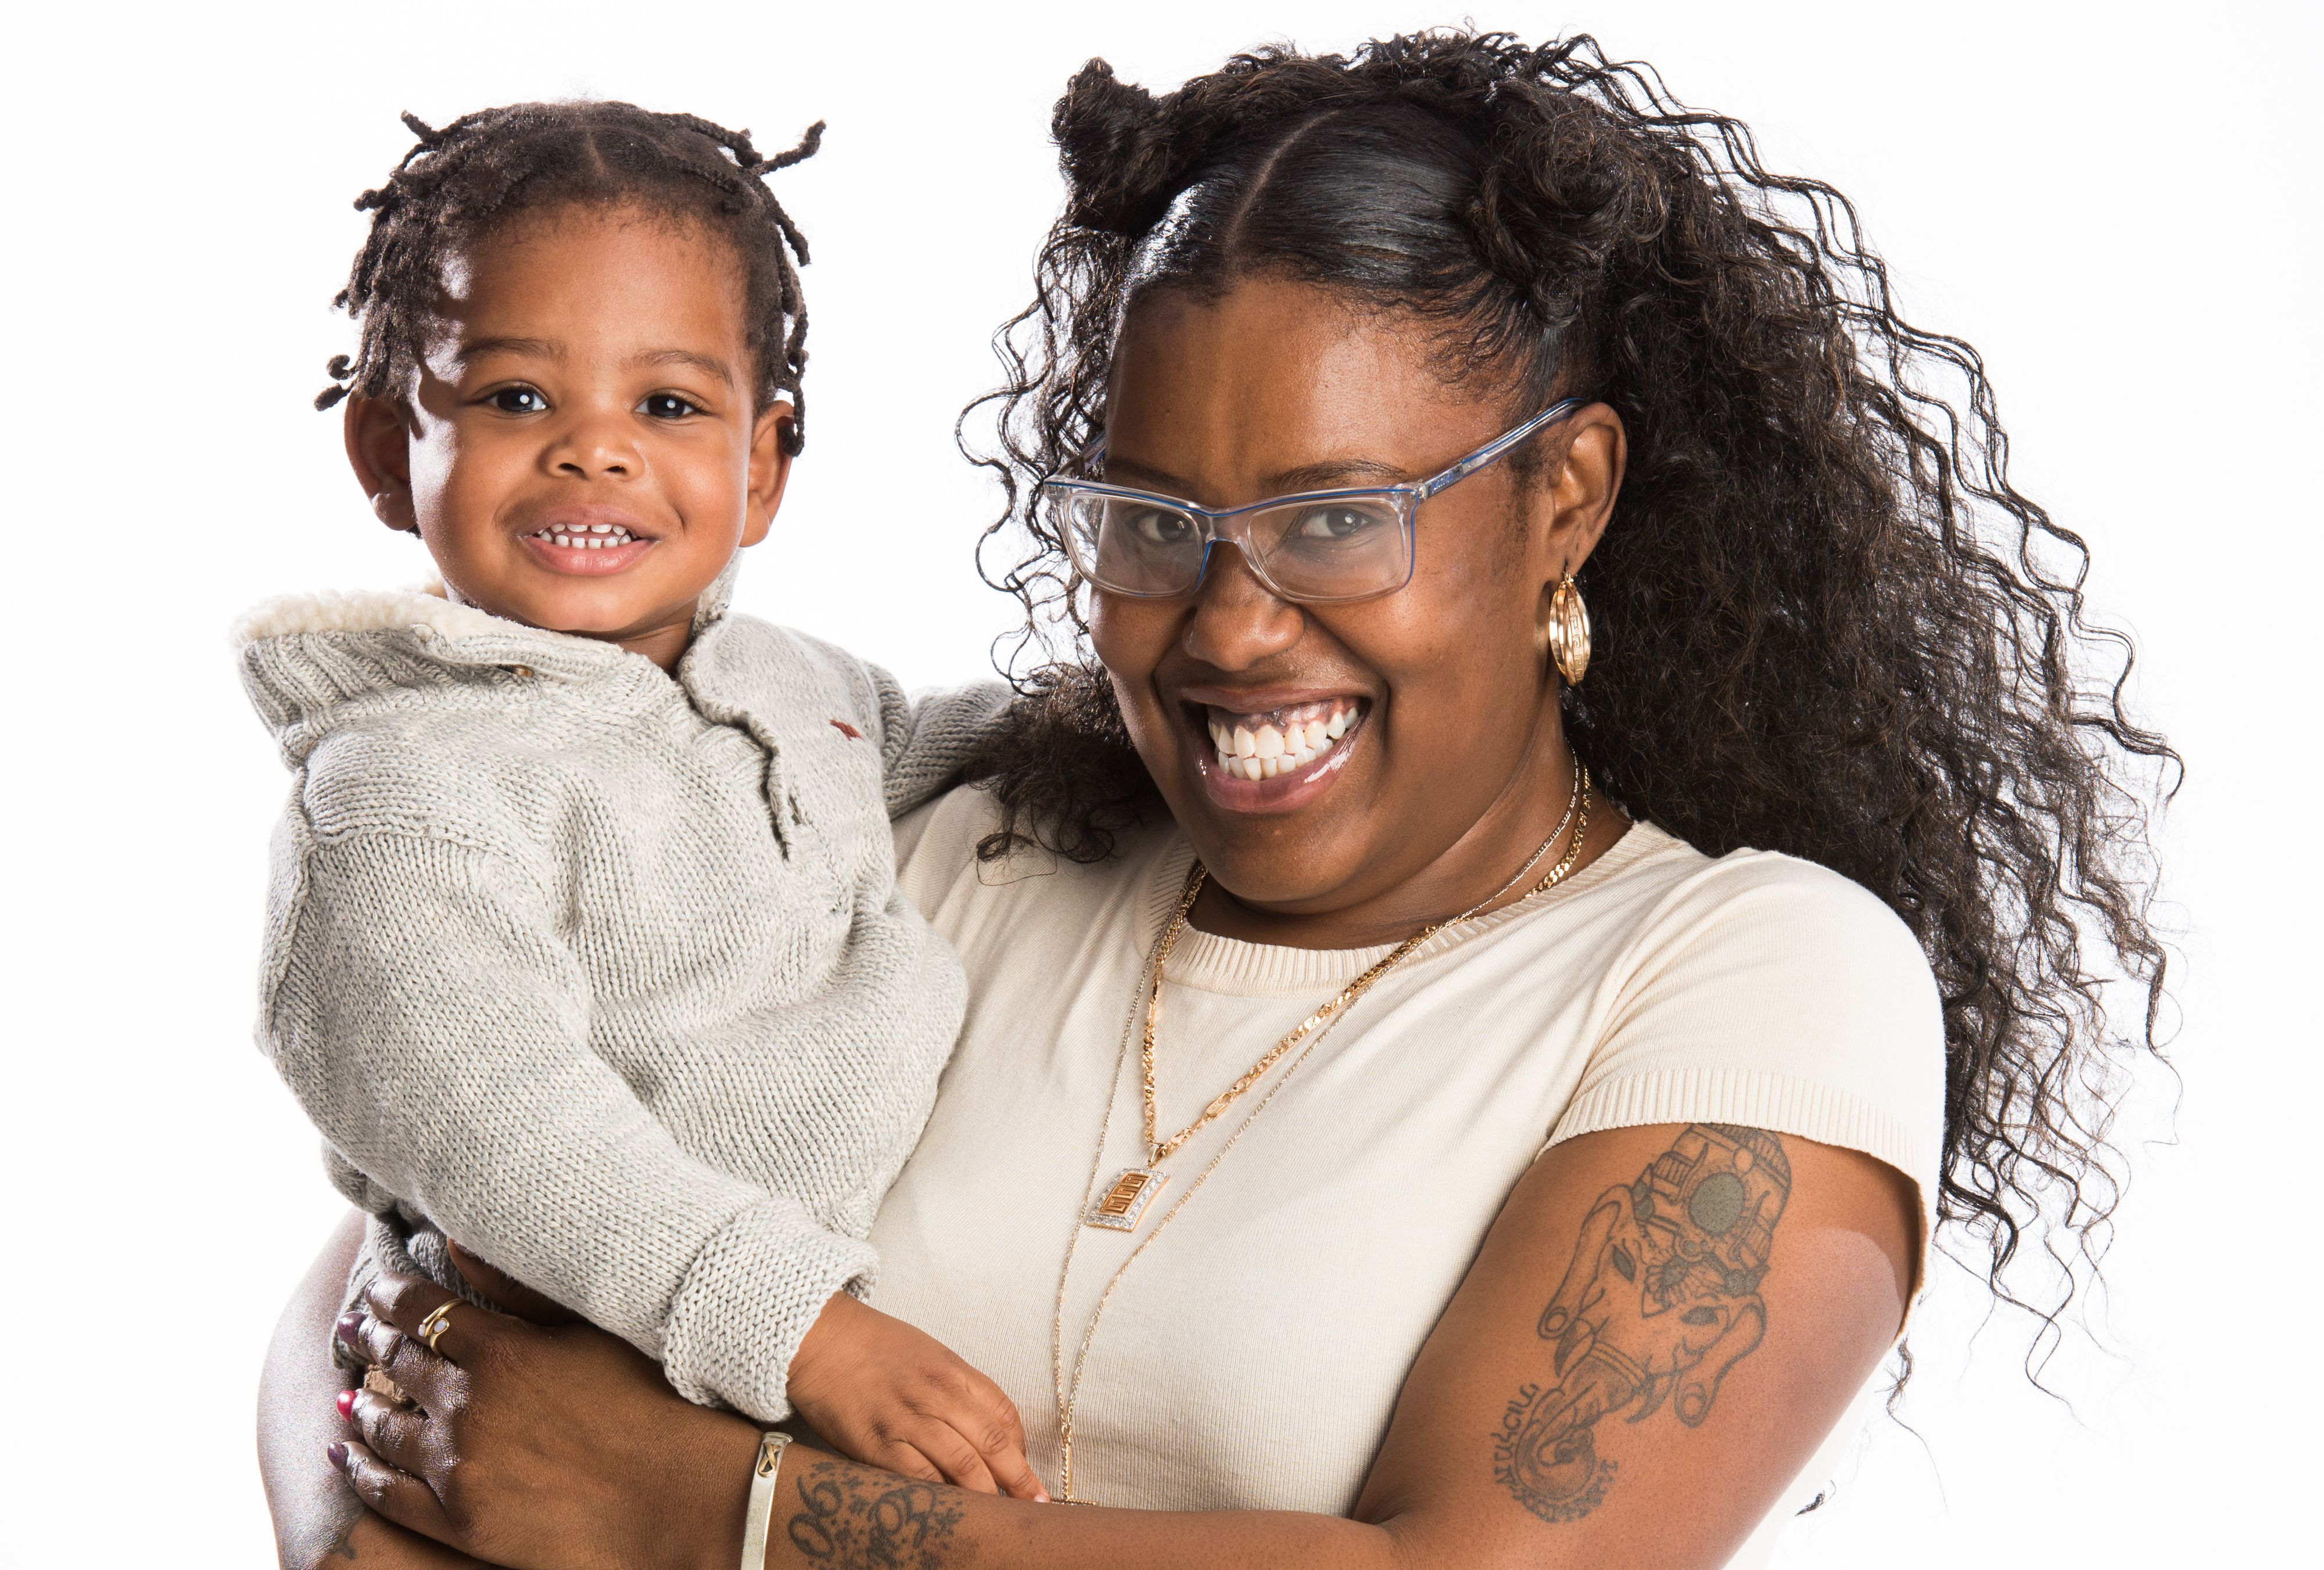 African American woman with glasses and tattoos holds baby in studio portrait